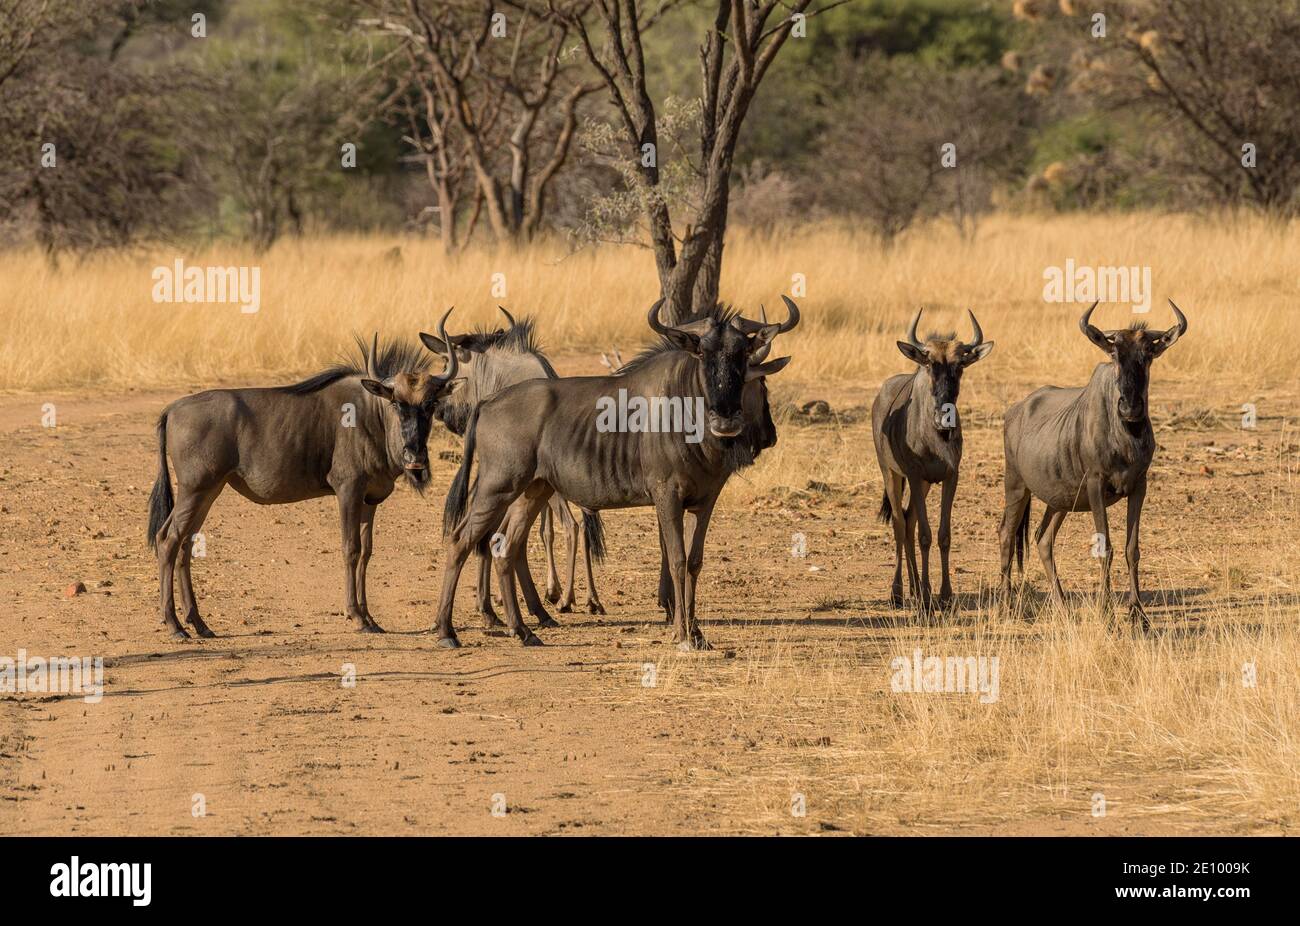 Wildebeests standing a small group in the savannah, Namibia Stock Photo